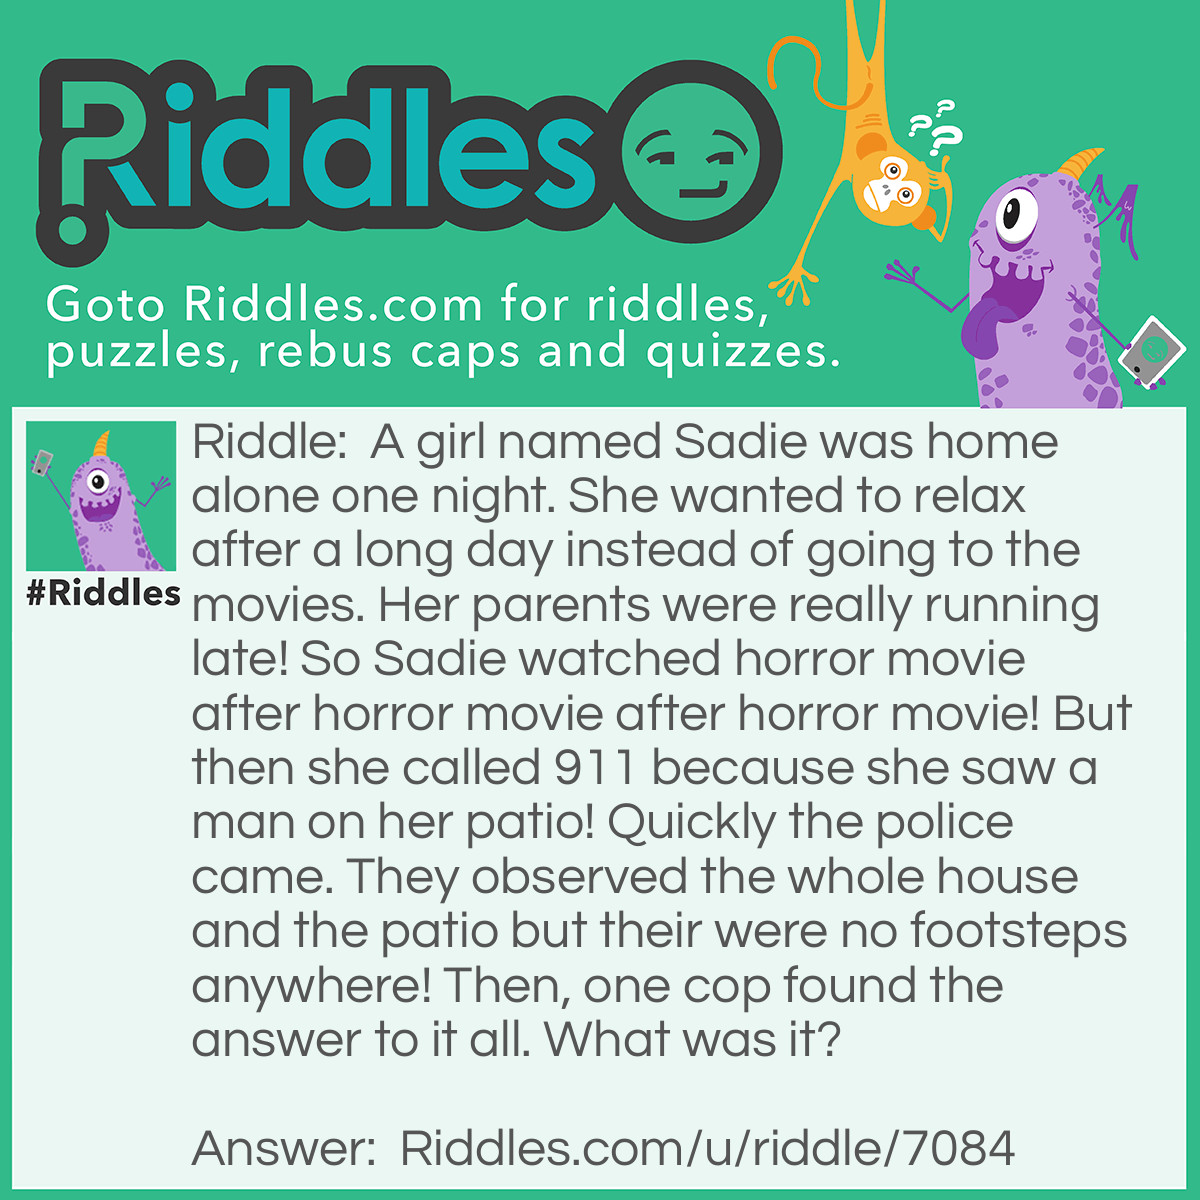 Riddle: A girl named Sadie was home alone one night. She wanted to relax after a long day instead of going to the movies. Her parents were really running late! So Sadie watched horror movie after horror movie after horror movie! But then she called 911 because she saw a man on her patio! Quickly the police came. They observed the whole house and the patio but their were no footsteps anywhere! Then, one cop found the answer to it all. What was it? Answer: A man had broke into the house and hid behind the couch. The cop found footprints back there, and it was the mans reflection that Sadie saw.